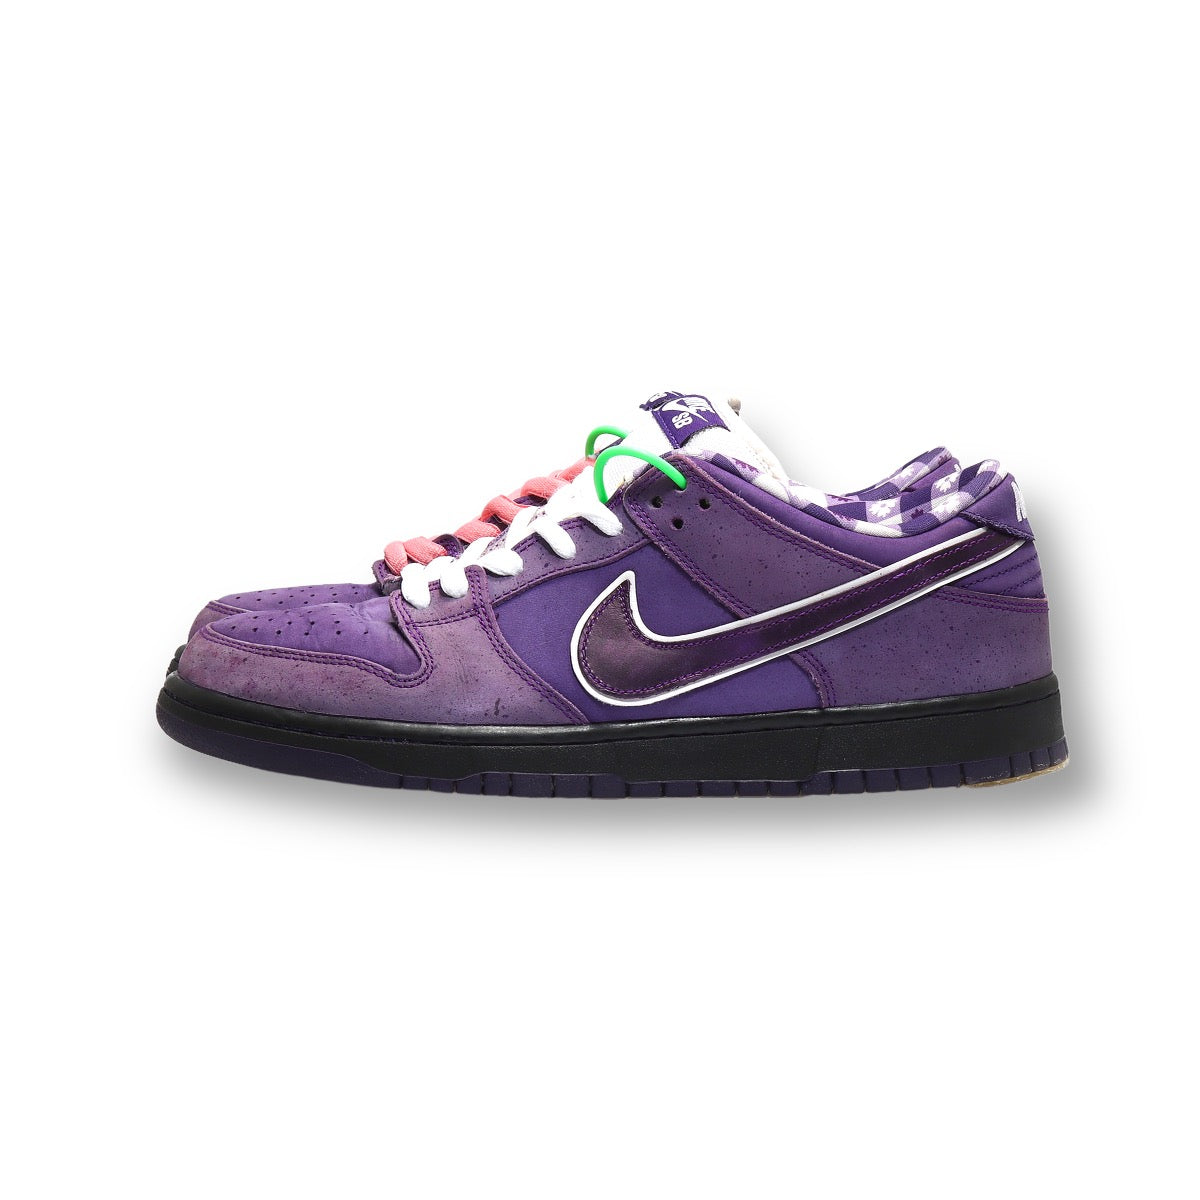 Nike Dunk SB Concepts Purple Lobster Low